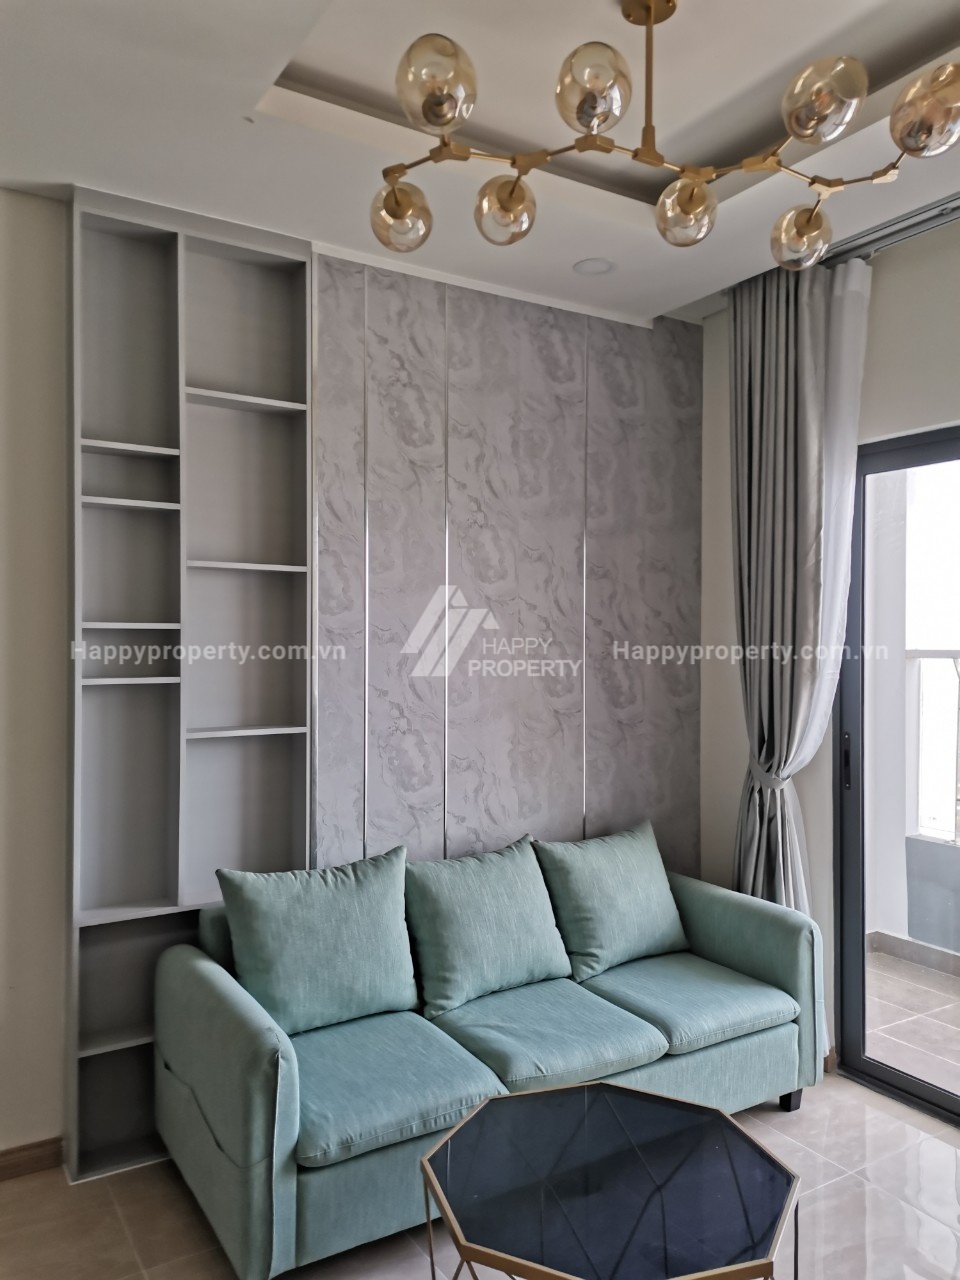 Fully-furnished Monarchy Apartment For Rent – MNR33